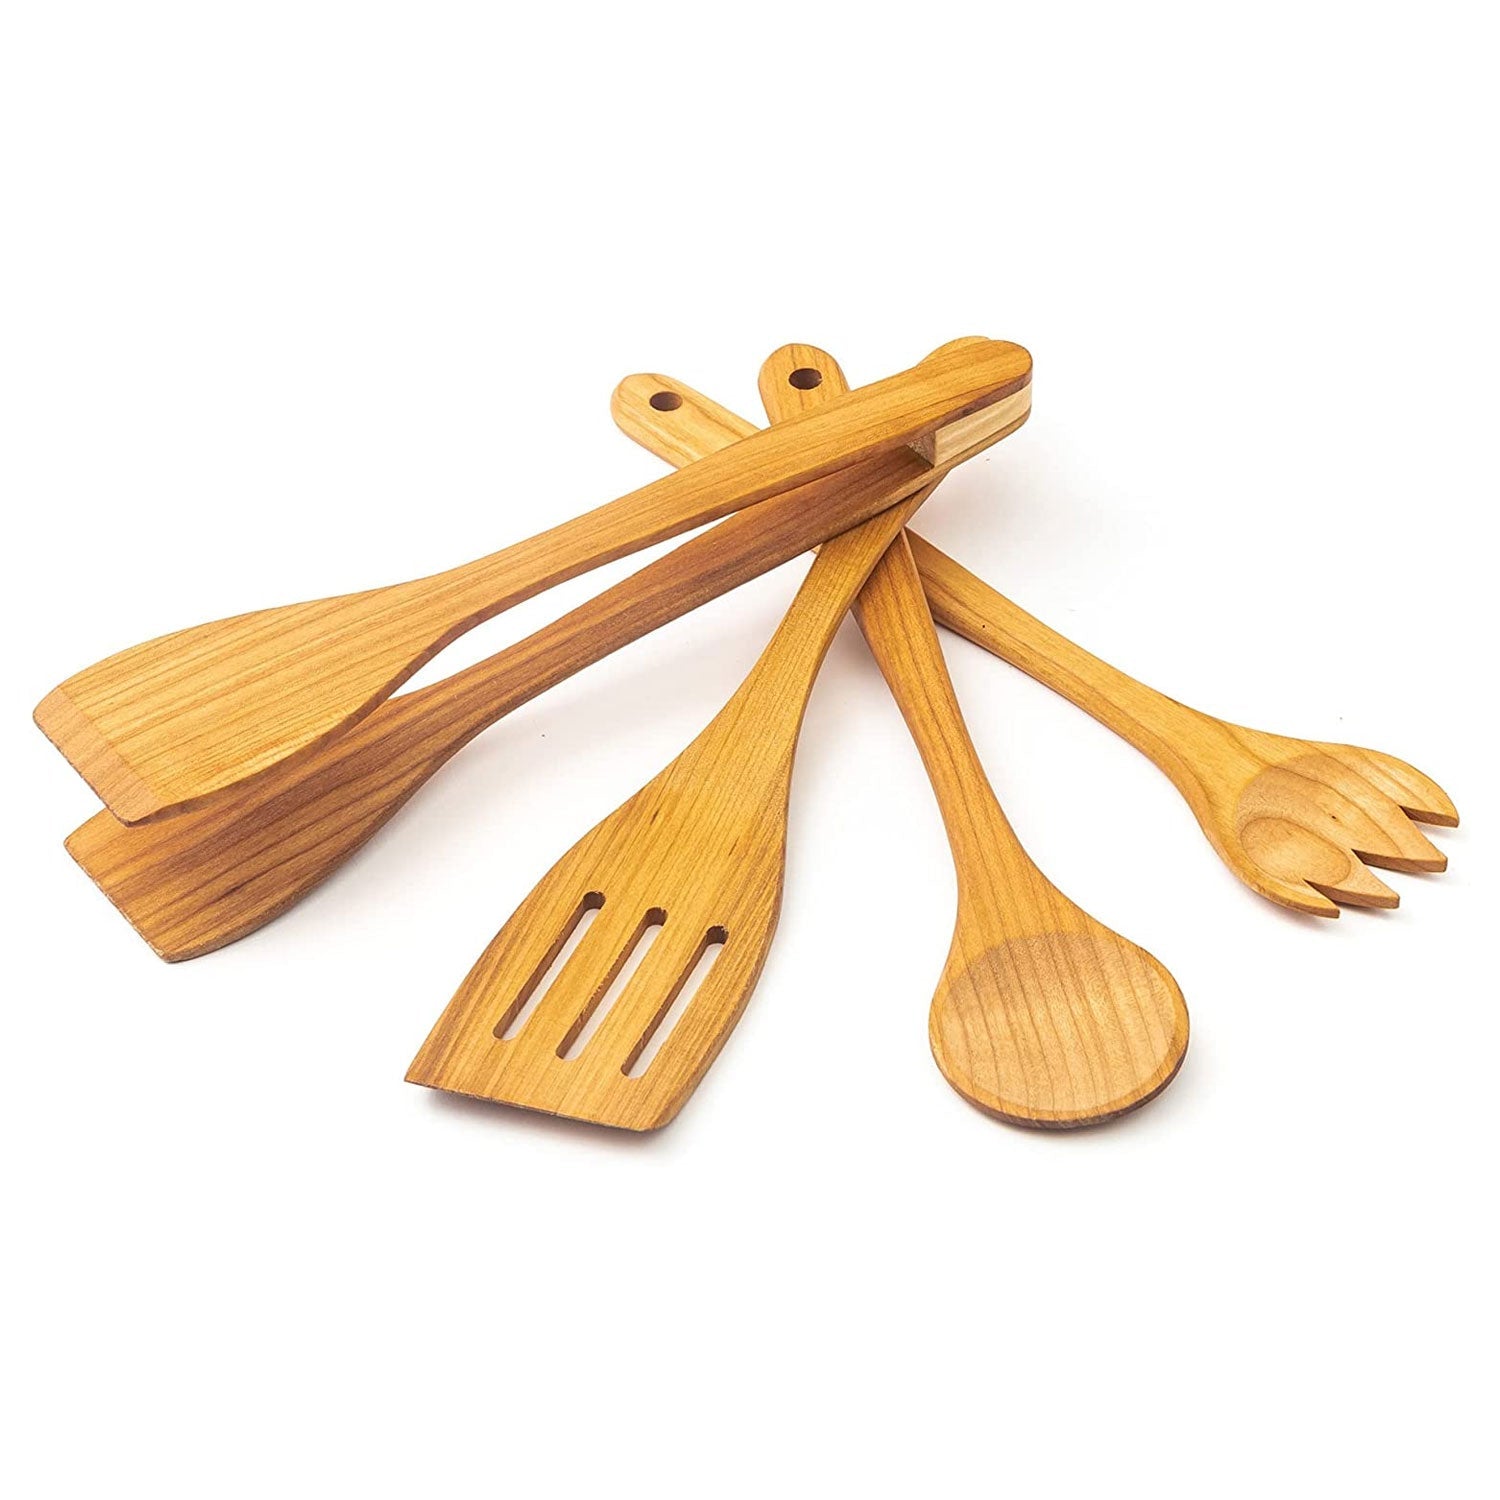 4 PC OLIVE-WOOD UTENSIL COOKING SET - DEAR DACY